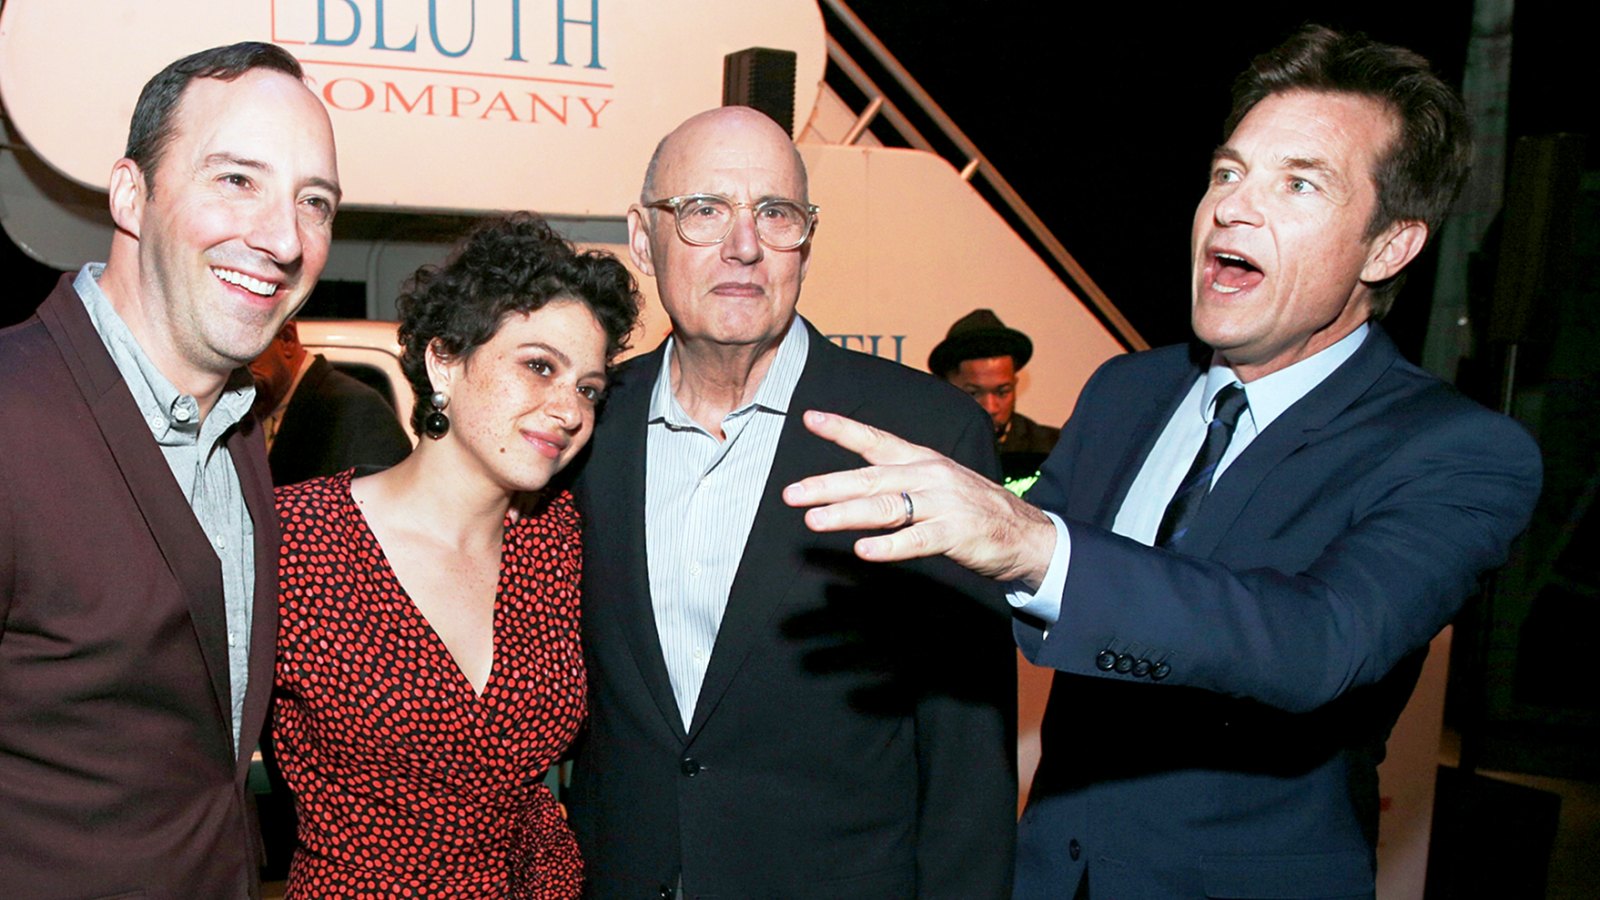 Tony Hale, Alia Shawkat, Jeffrey Tambor and Jason Bateman attend the after party for the 2018 premiere of Netflix's 'Arrested Development' Season 5 at Netflix FYSee Theater in Los Angeles, California.